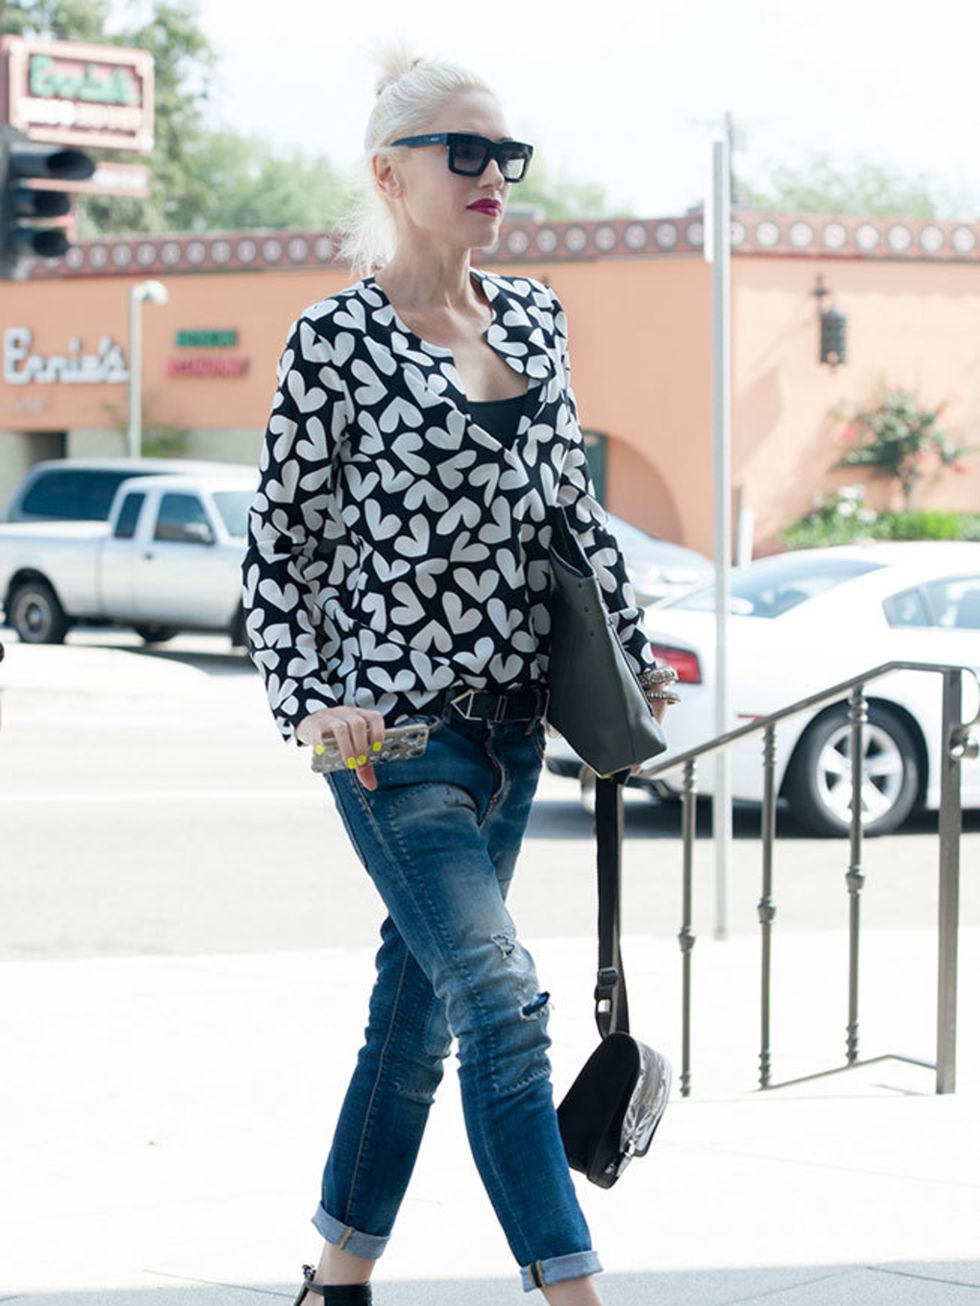 Gwen manages to make holding a phone and multiple bags look cool.